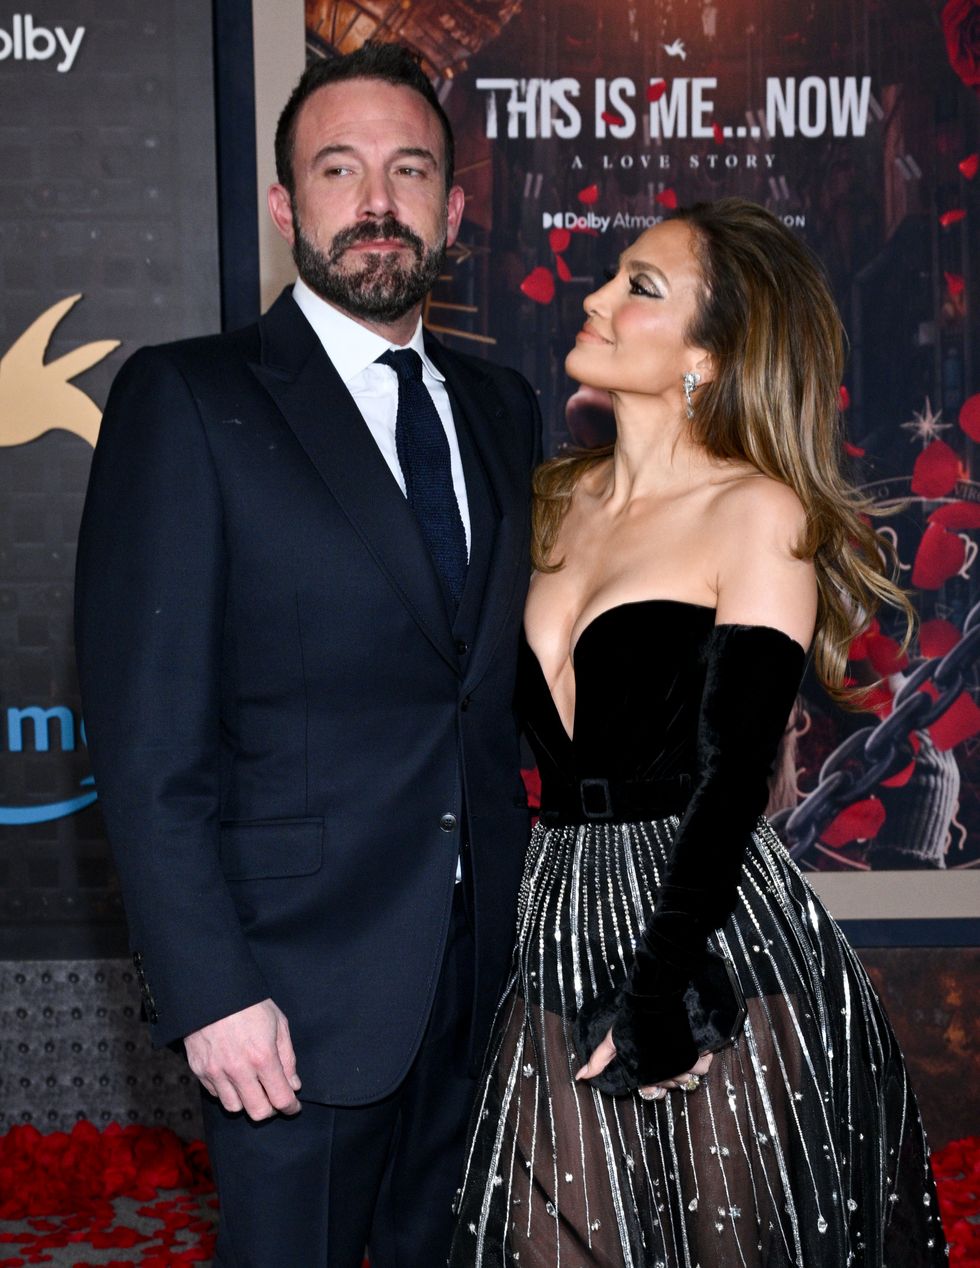 ben affleck and jennifer lopez at the premiere of this is me now a love story held at dolby theatre on february 13, 2024 in los angeles, california photo by michael bucknervariety via getty images